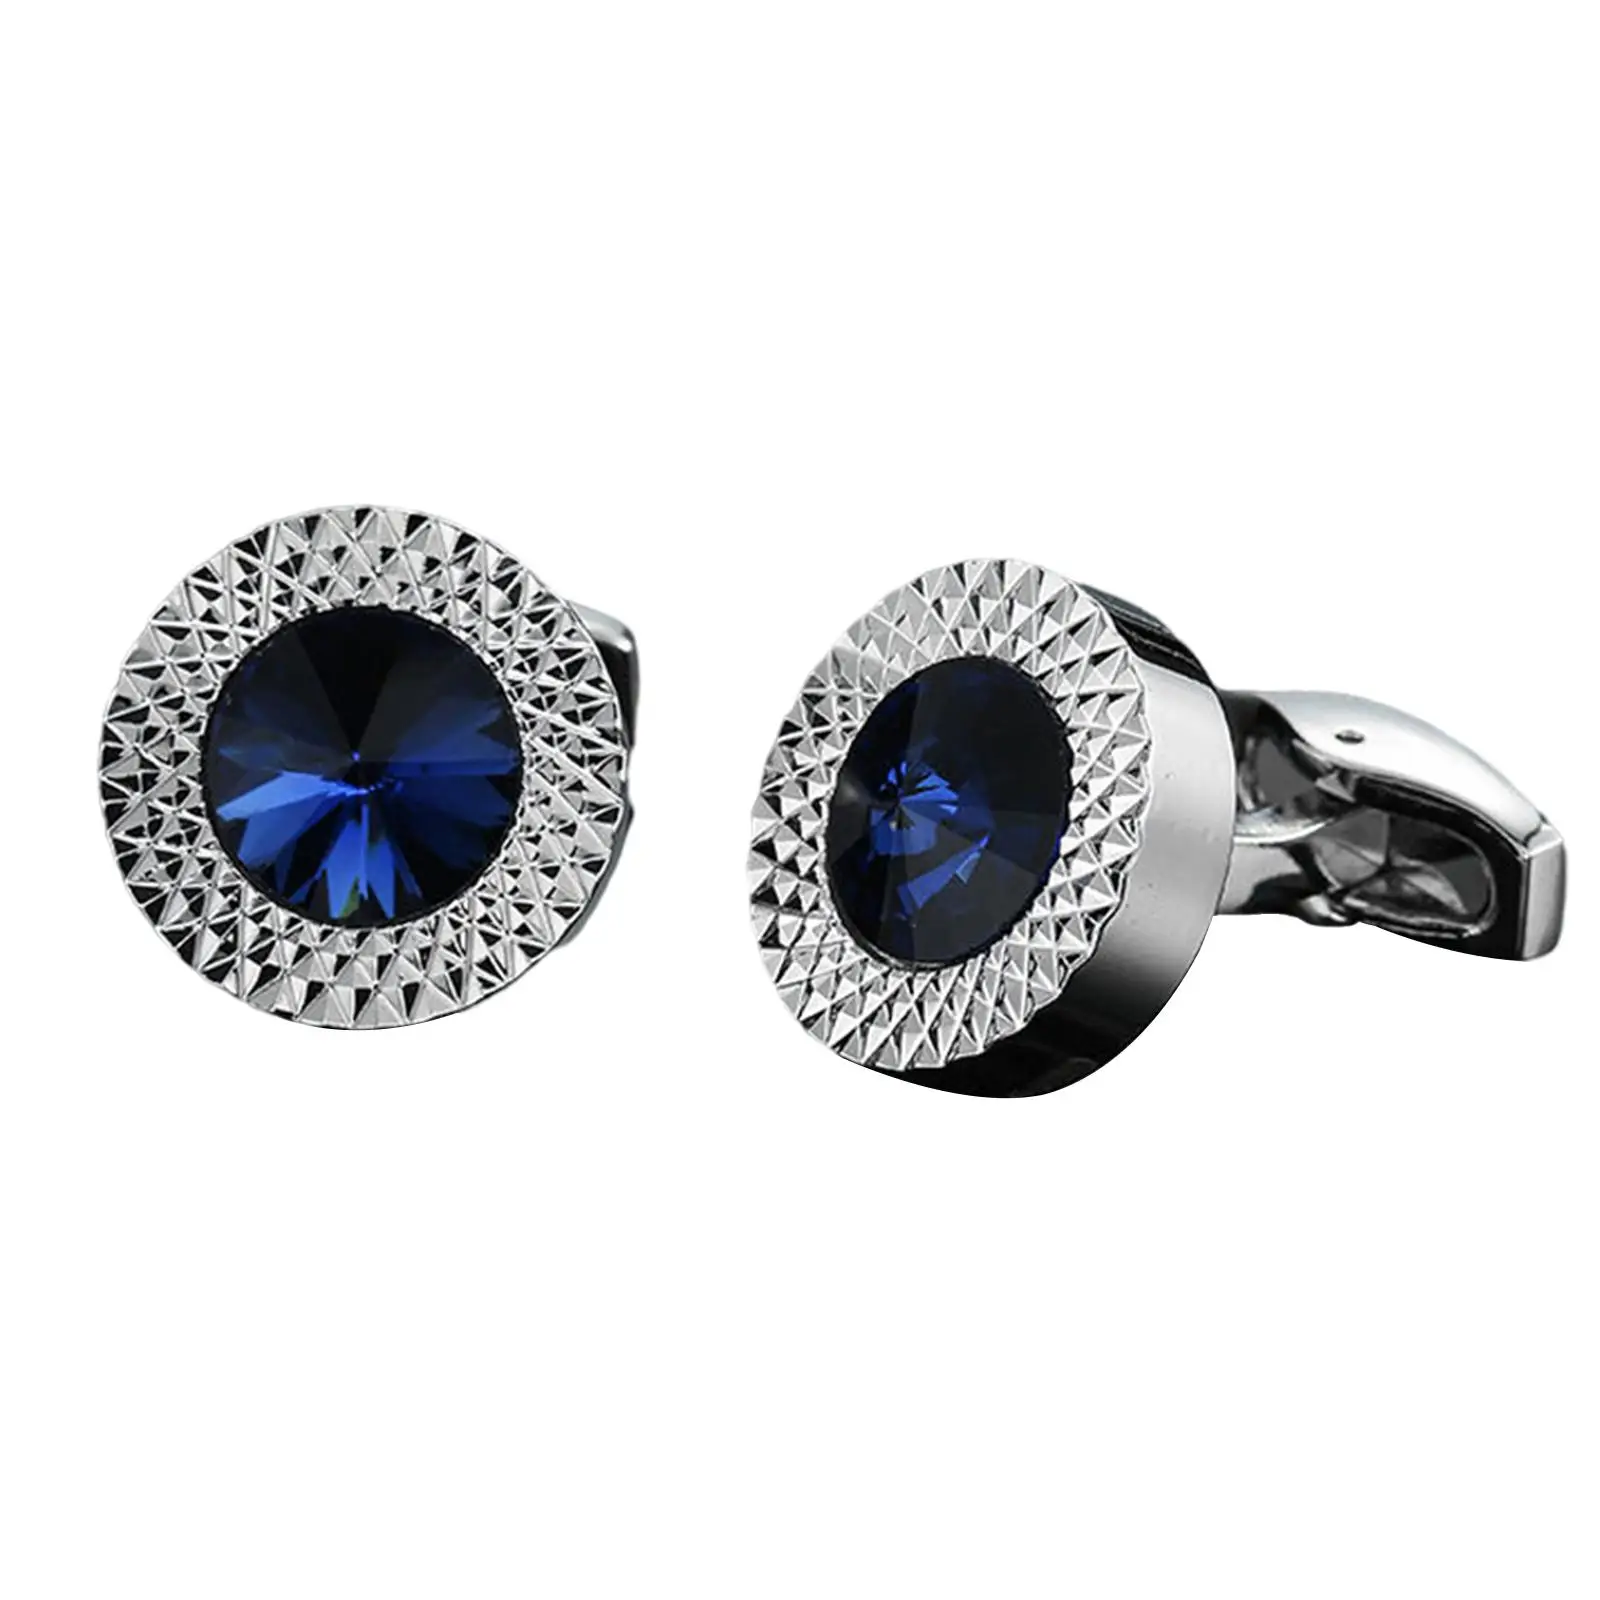 1 Pair Classy Stylish Shirt Cuff Links Crystal  Suit Accessories for Party